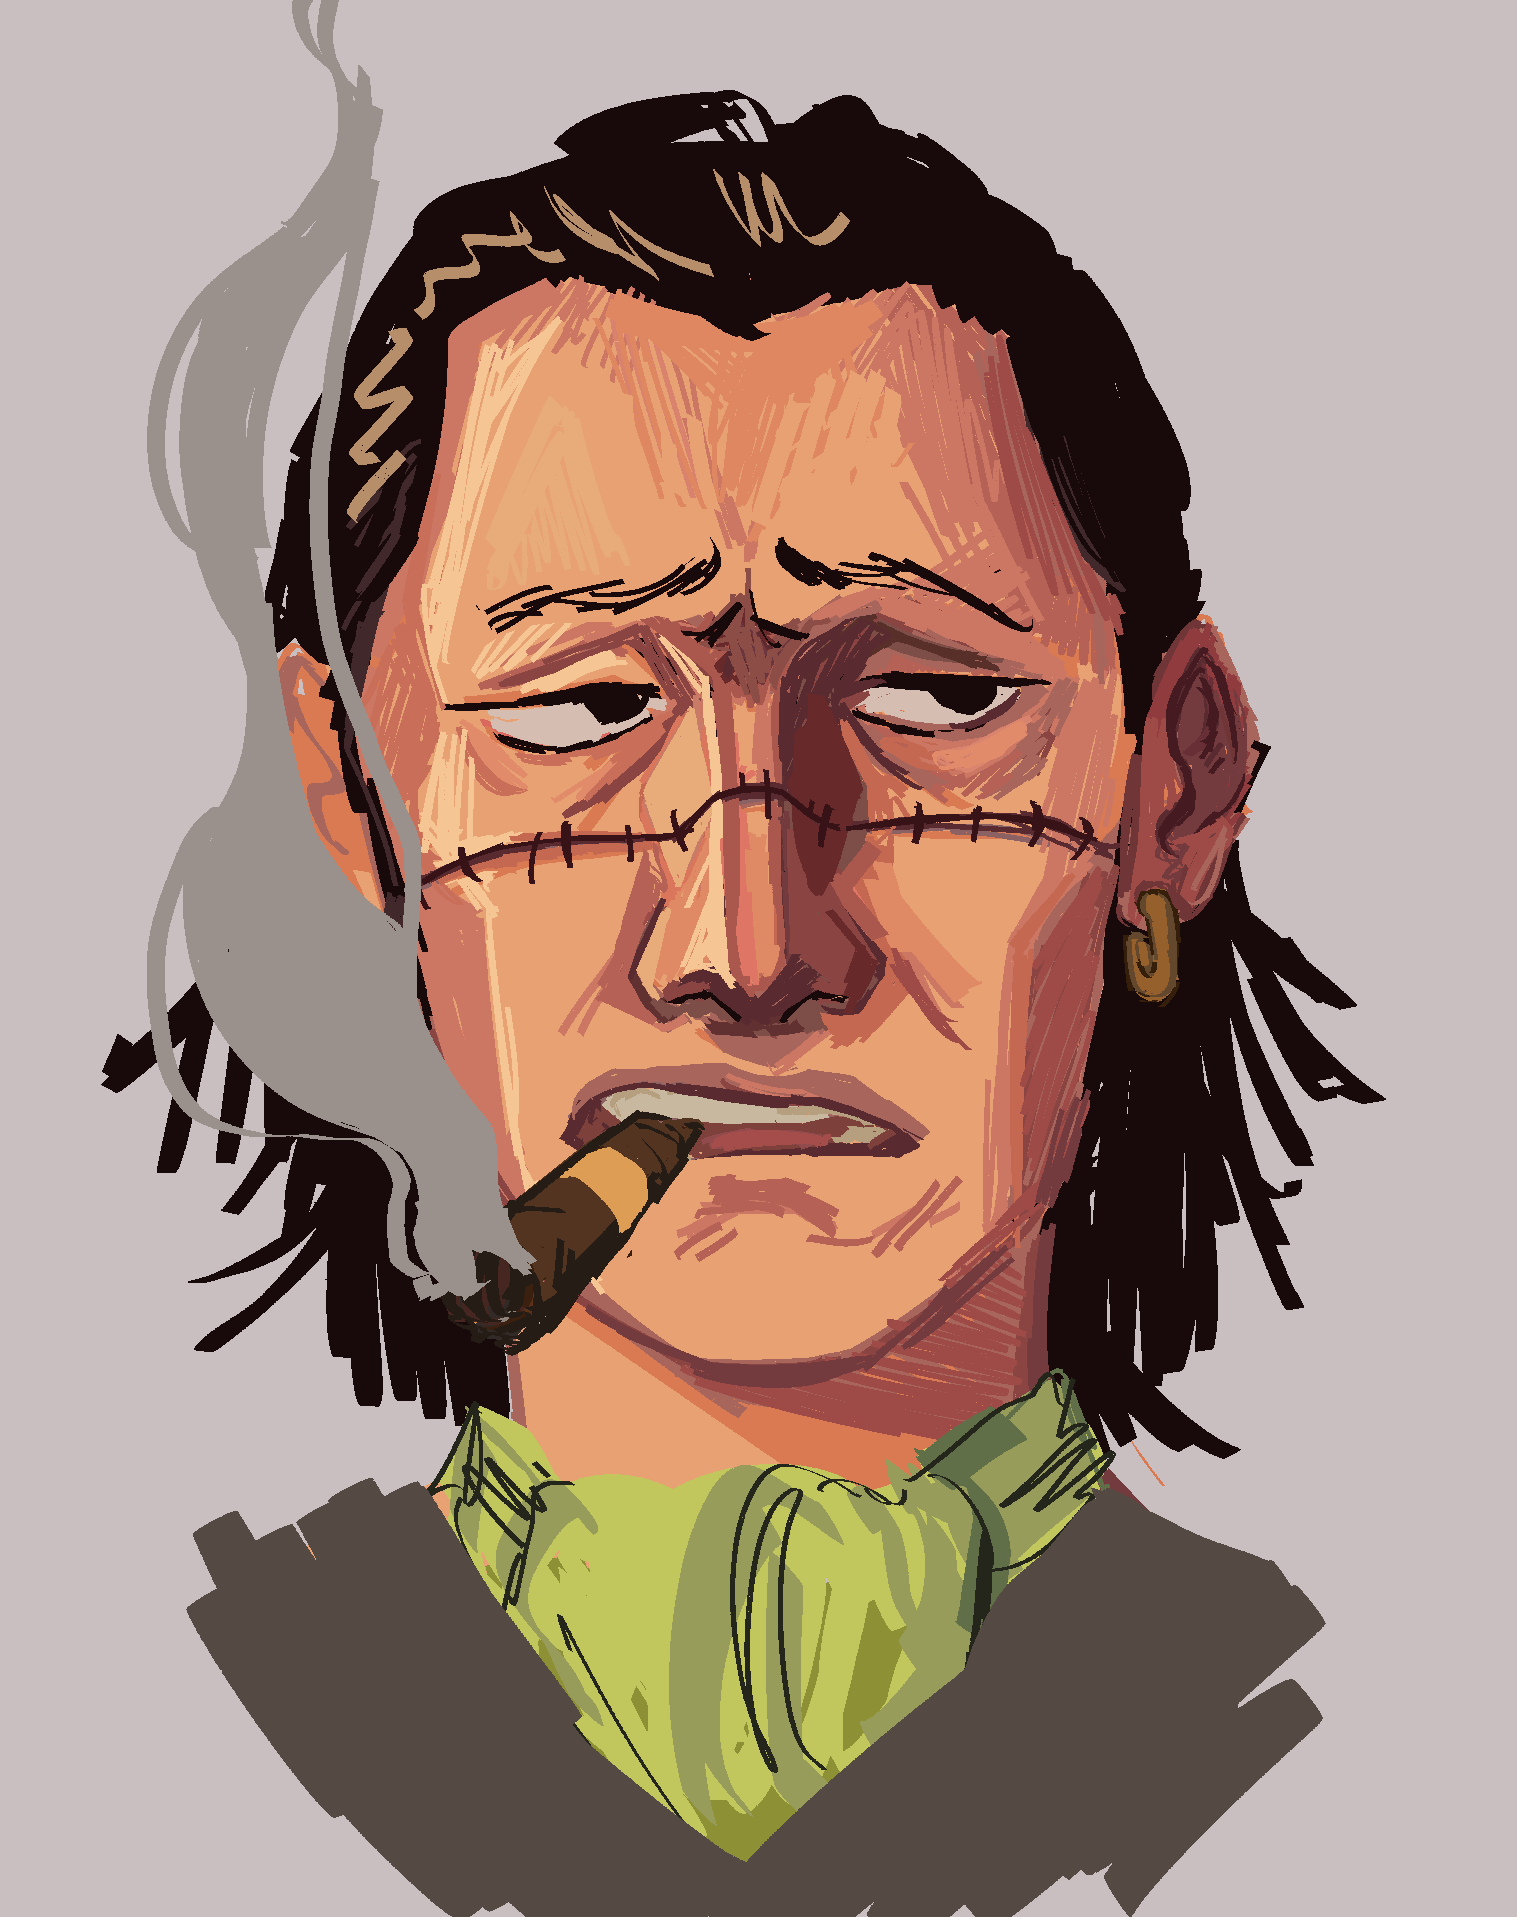 A digital portrait of Crocodile from One Piece. He has his usual scowl and pinched brow, and he's looking off at something on his left, almost bored. He's roughly rendered, with clear, hard brush strokes. 